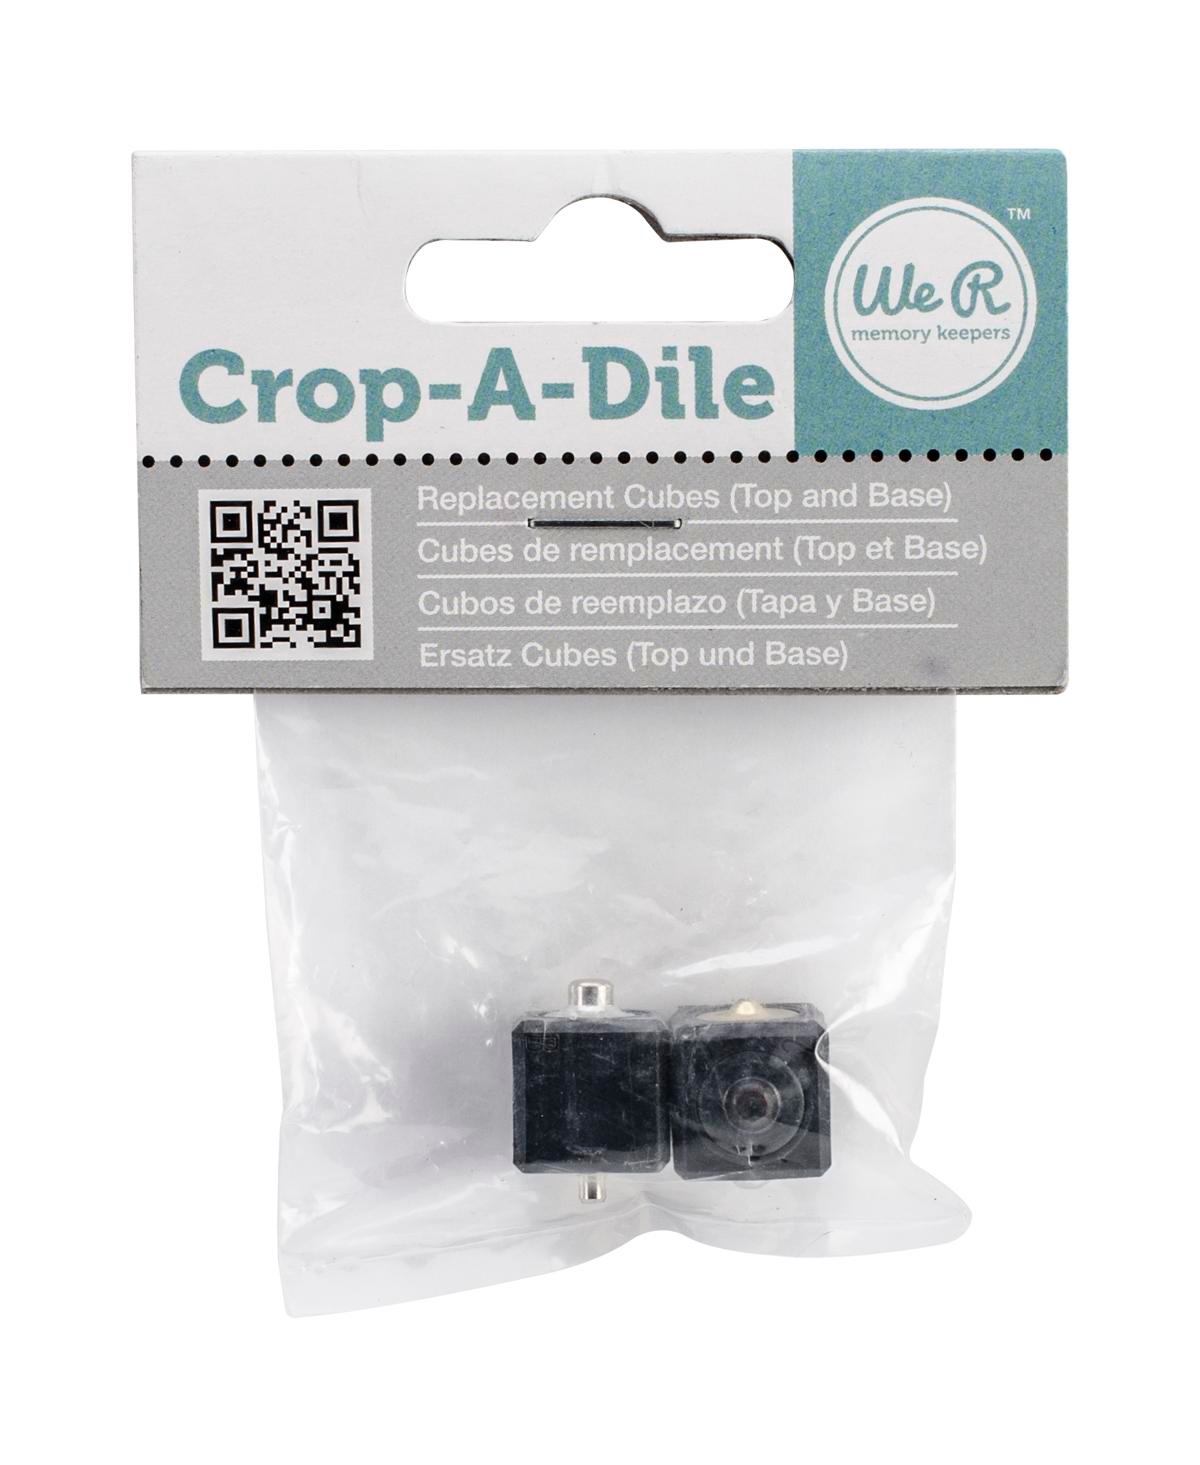 Crop-a-Dile Replacement Cubes-For 70907, WR660581, WR600580 & 6602484